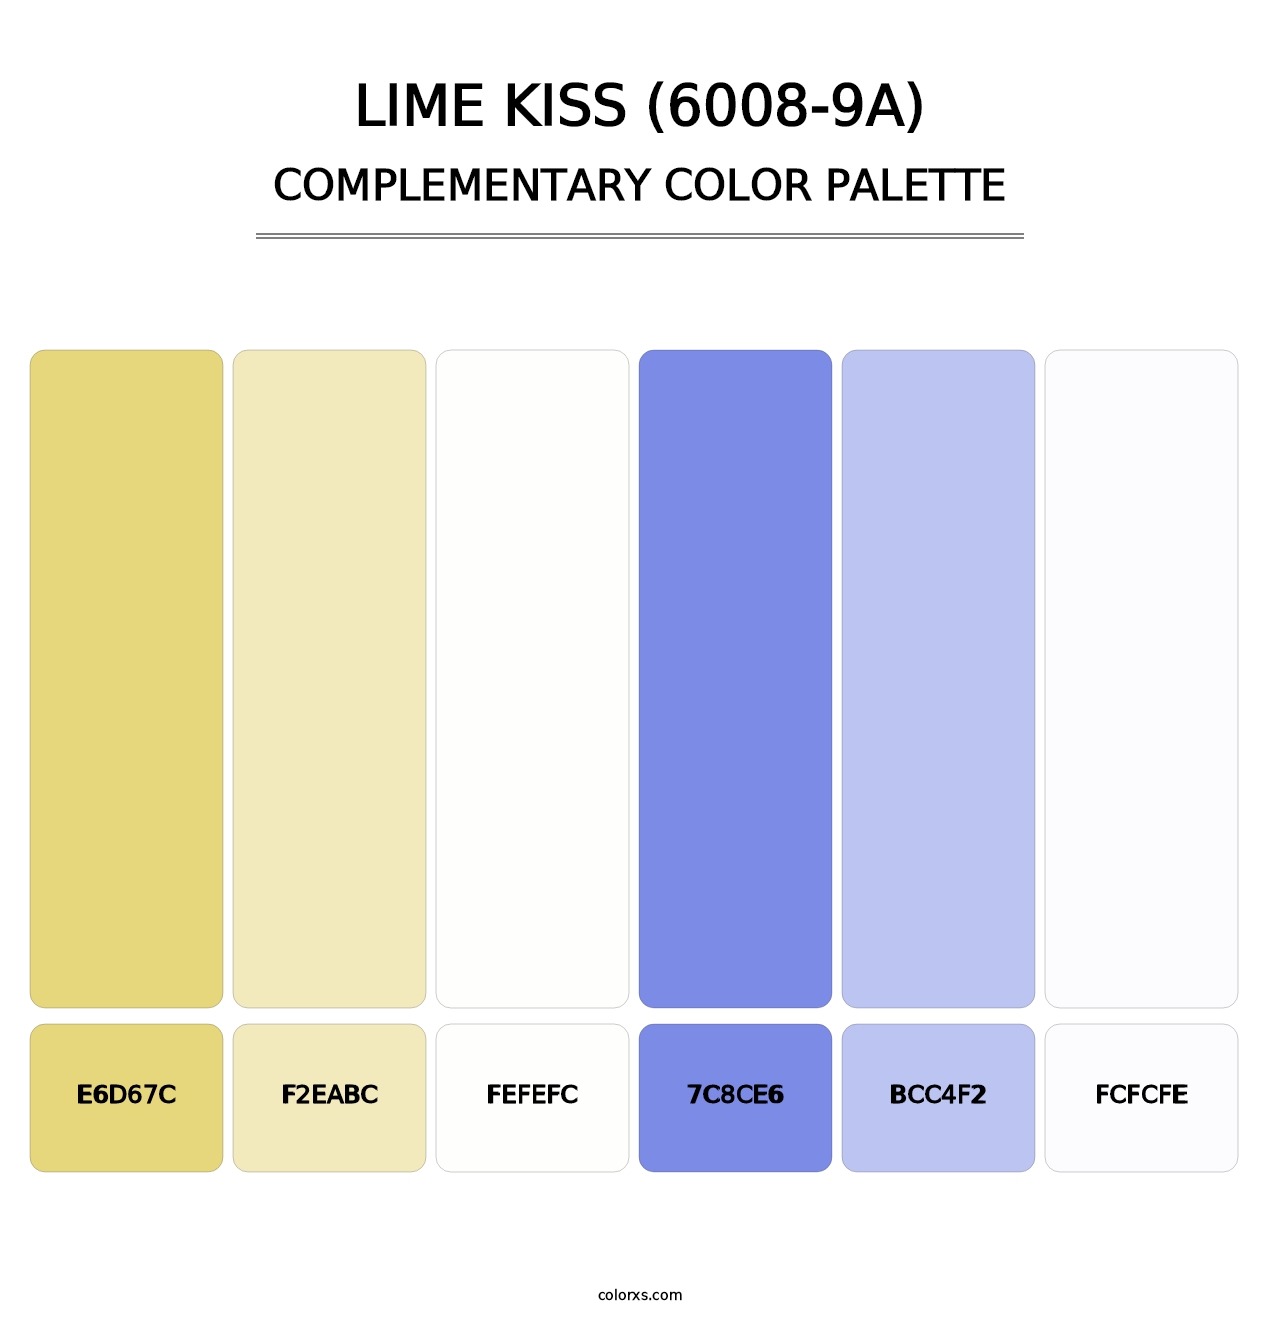 Lime Kiss (6008-9A) - Complementary Color Palette